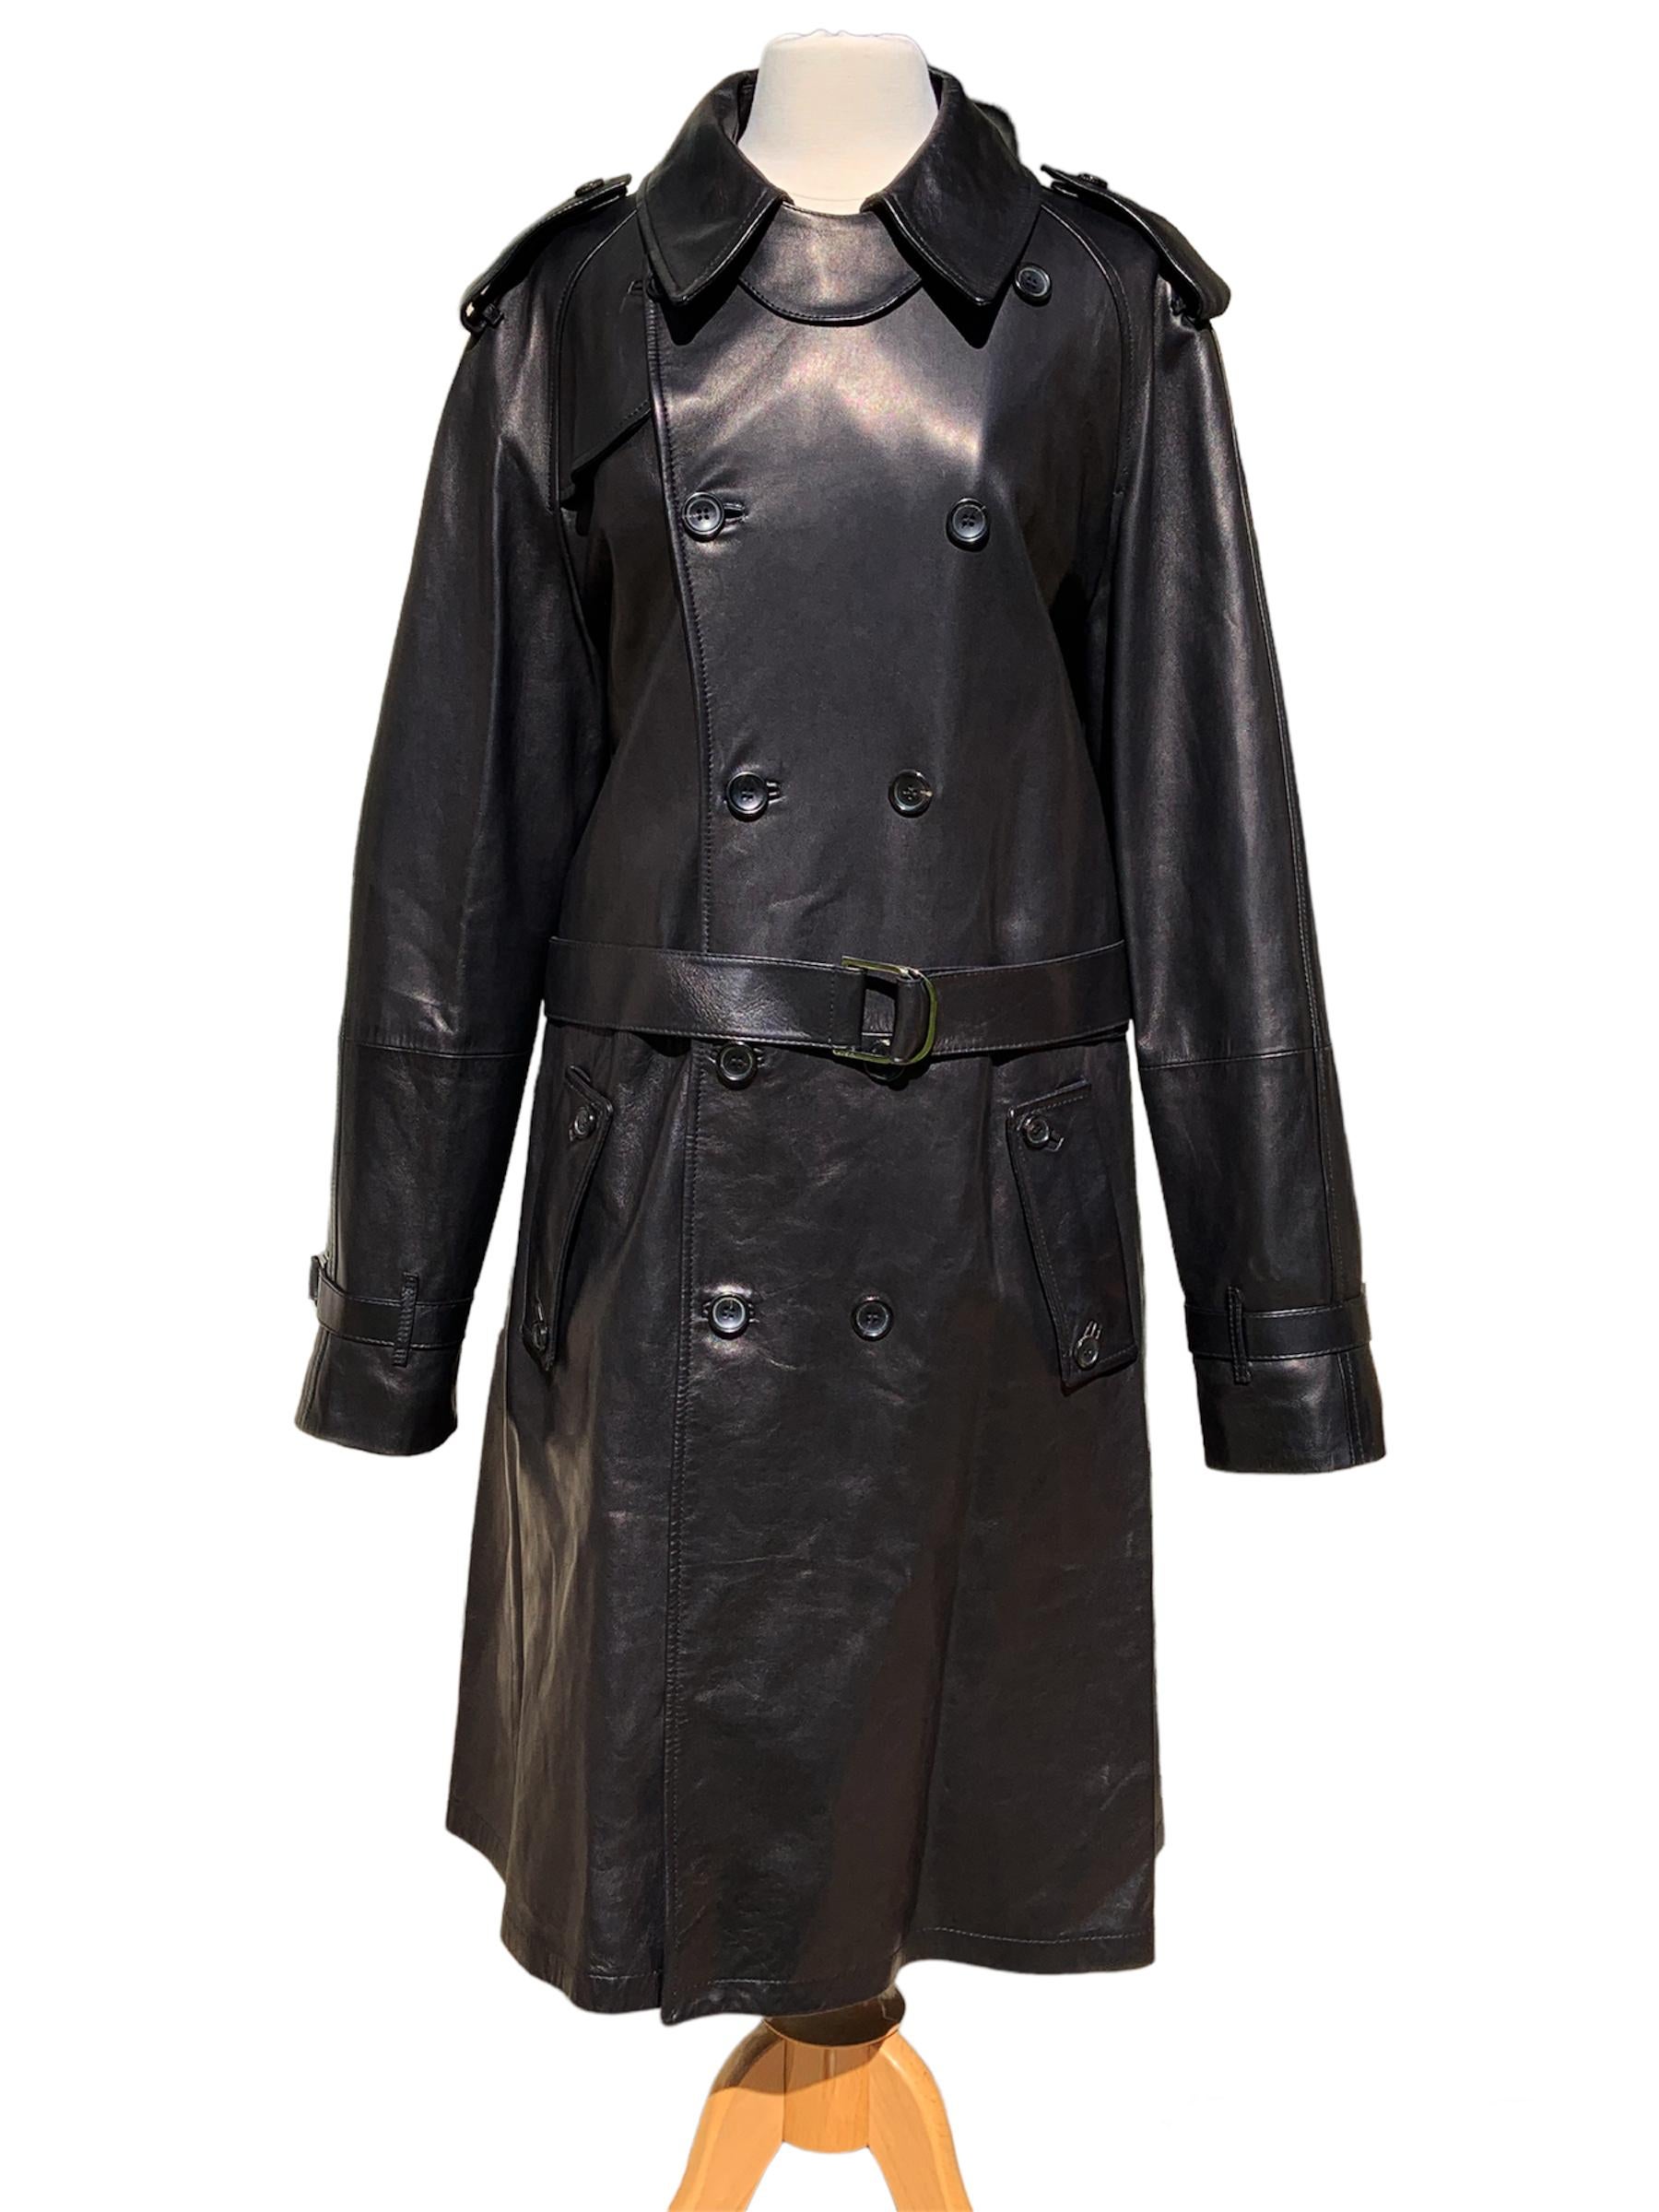 New and Iconic Tom Ford for Gucci Men's Black Leather Coat
F/W 2001 Collection
Italian size 54 ( US 44)
Genuine Leather, Double Breasted, Epaulets, Removable Belt, Side Pockets, Inner Pocket.
Back Slit with Buttons Closure, Adjustable Buckles at